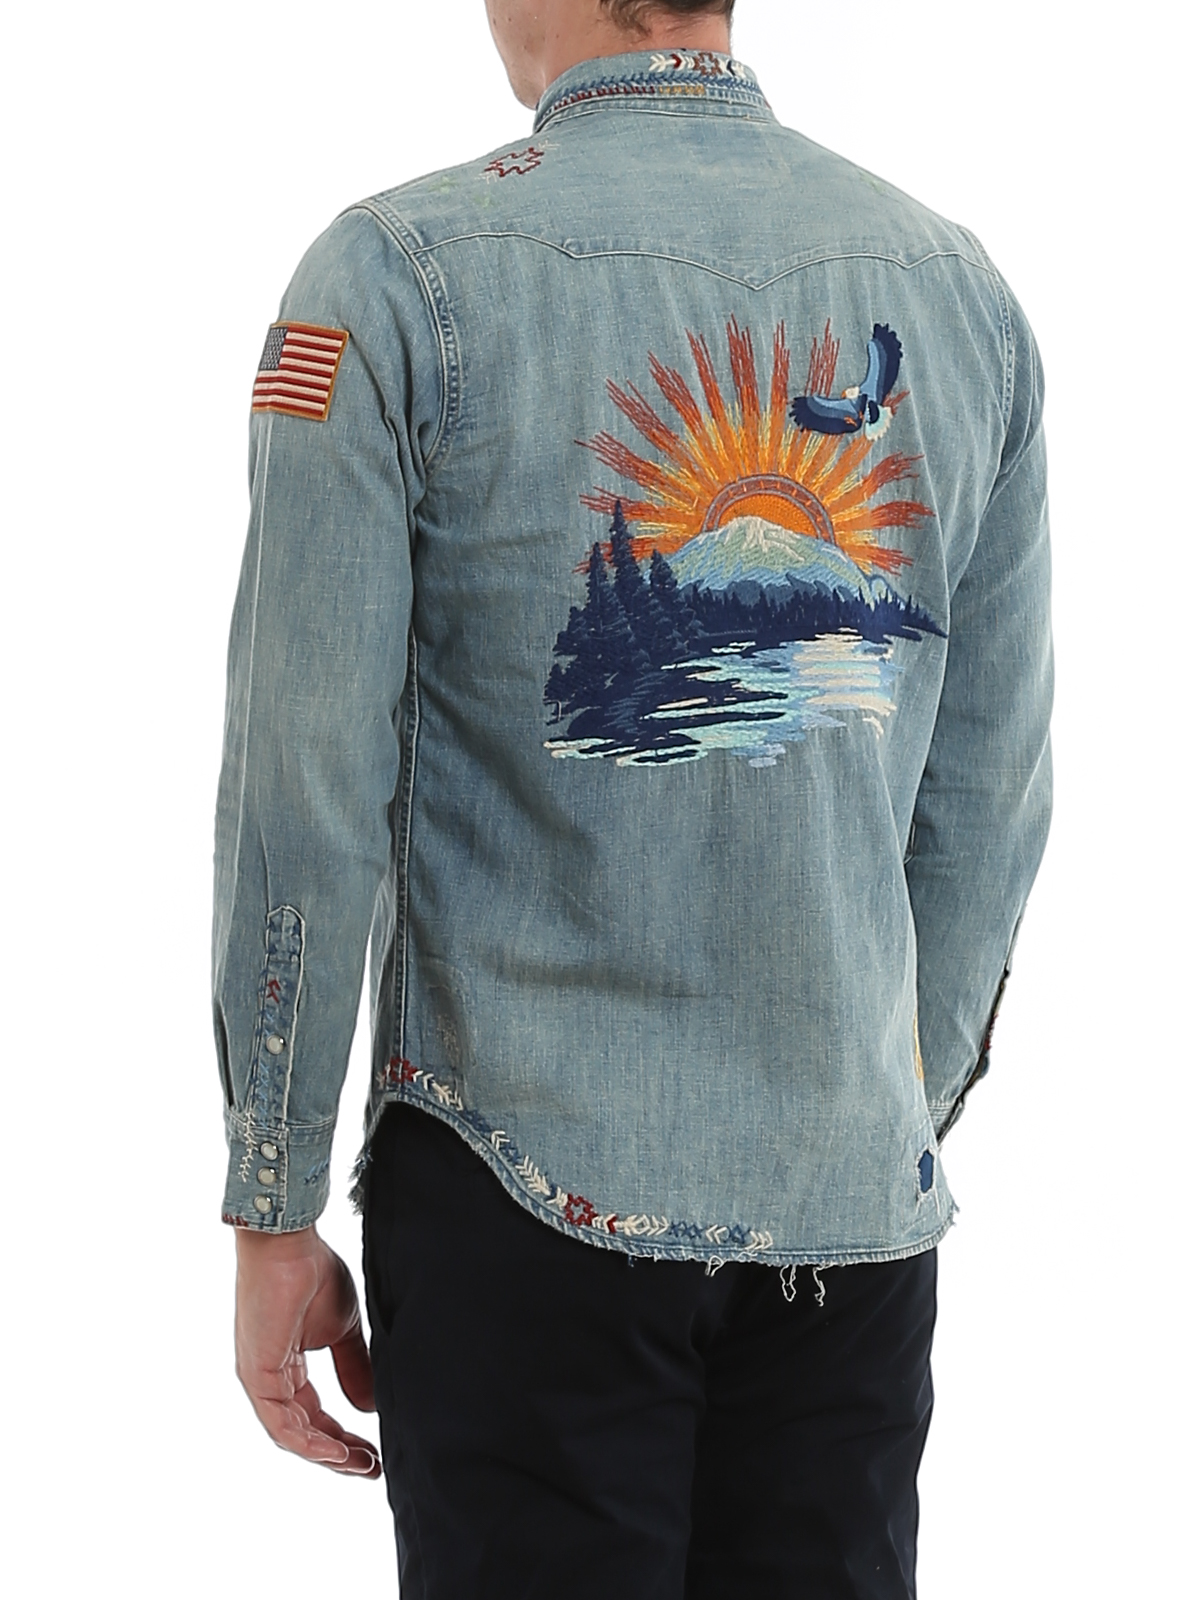 embroidered jean shirt